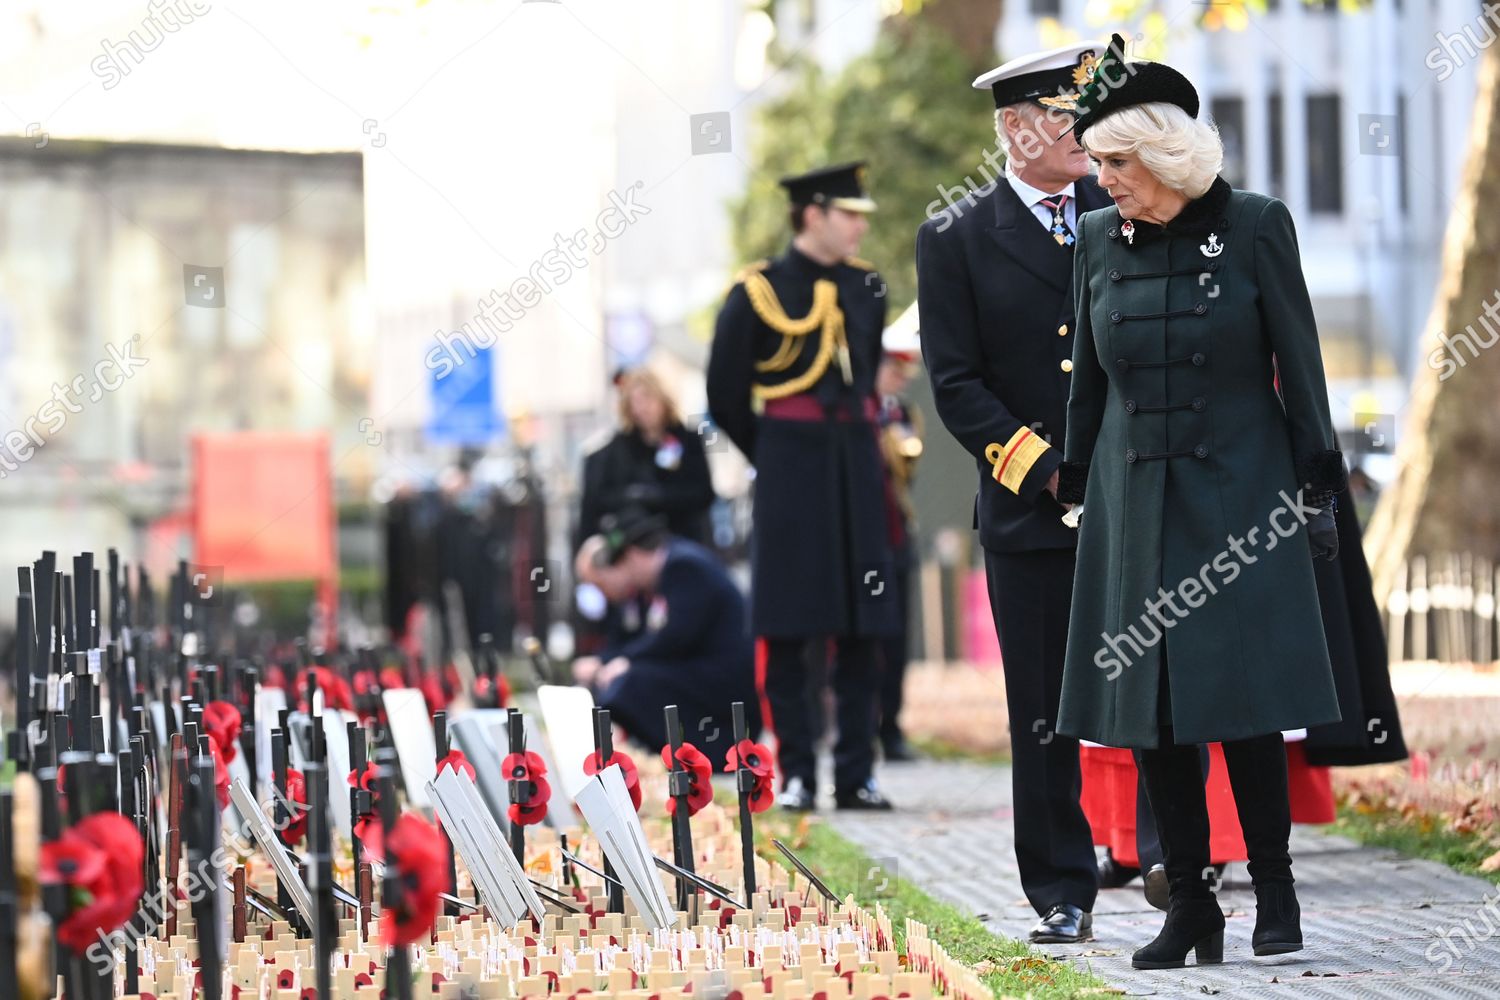 camilla-duchess-of-cornwall-attends-92nd-field-of-remembrance-at-westminster-abbey-london-uk-shutterstock-editorial-10995712ad.jpg